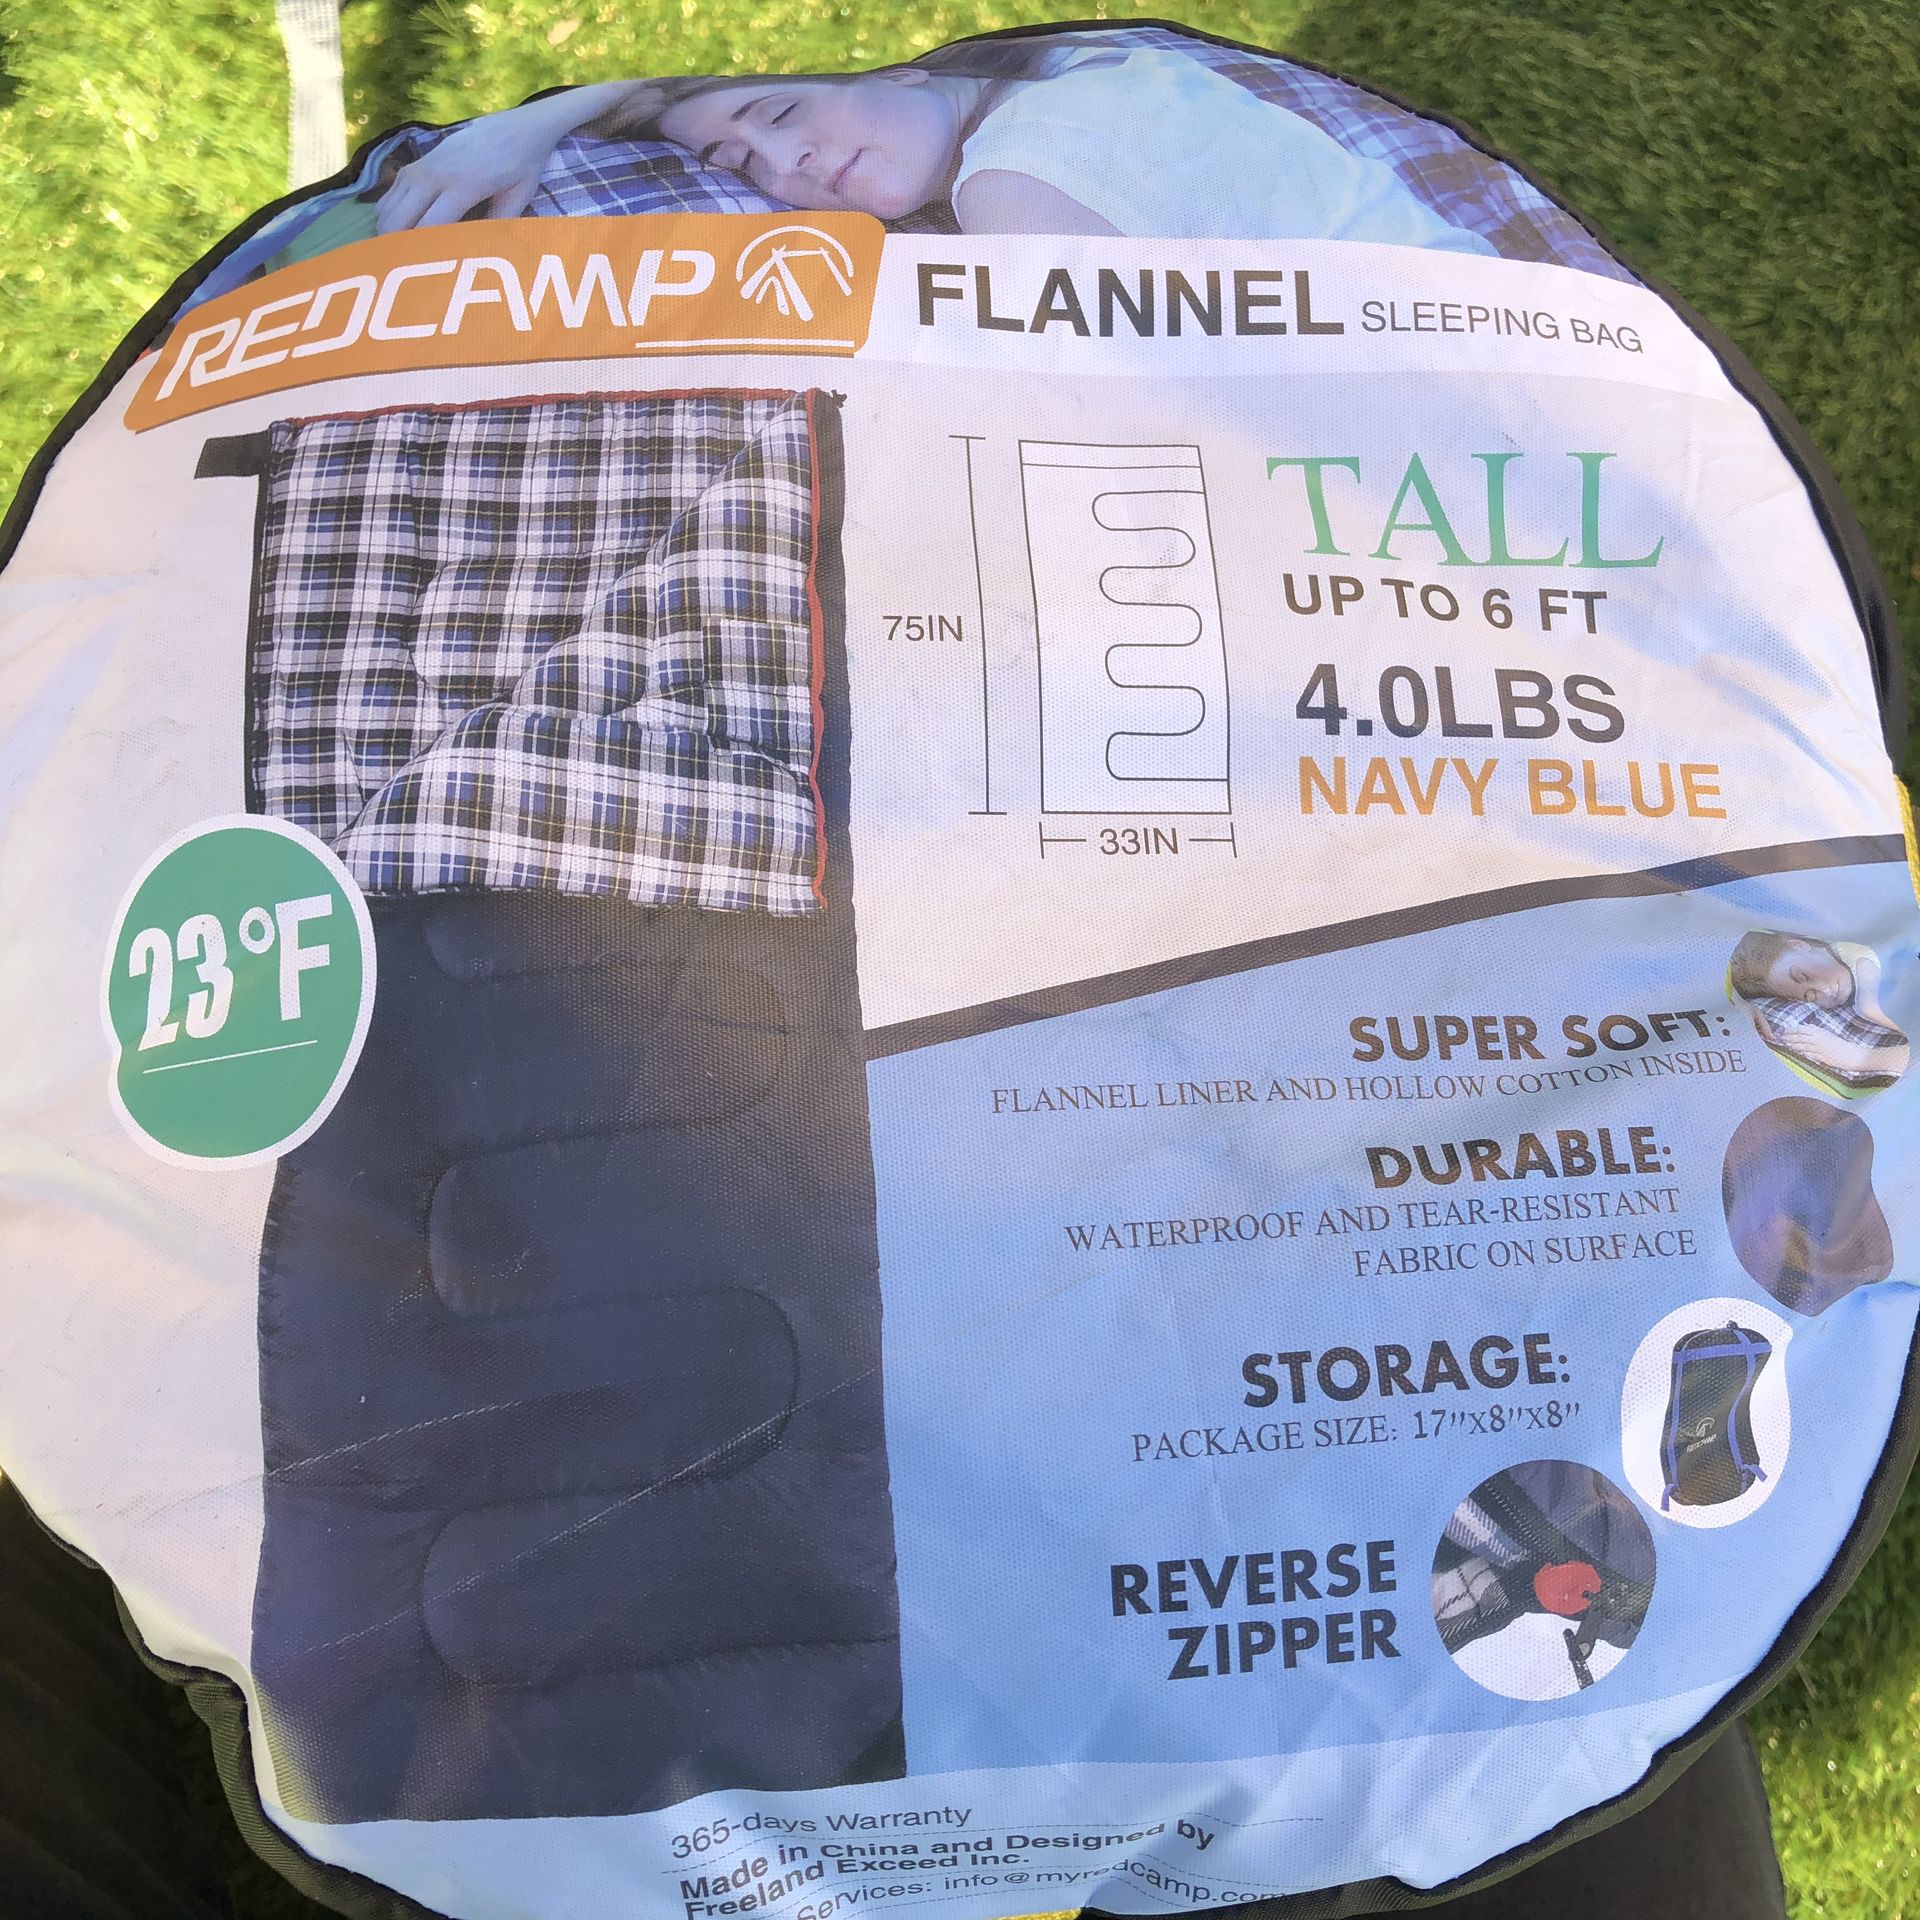 New RedCamp Flannel Cotton Adult Sleeping Bag 4lbs Filling